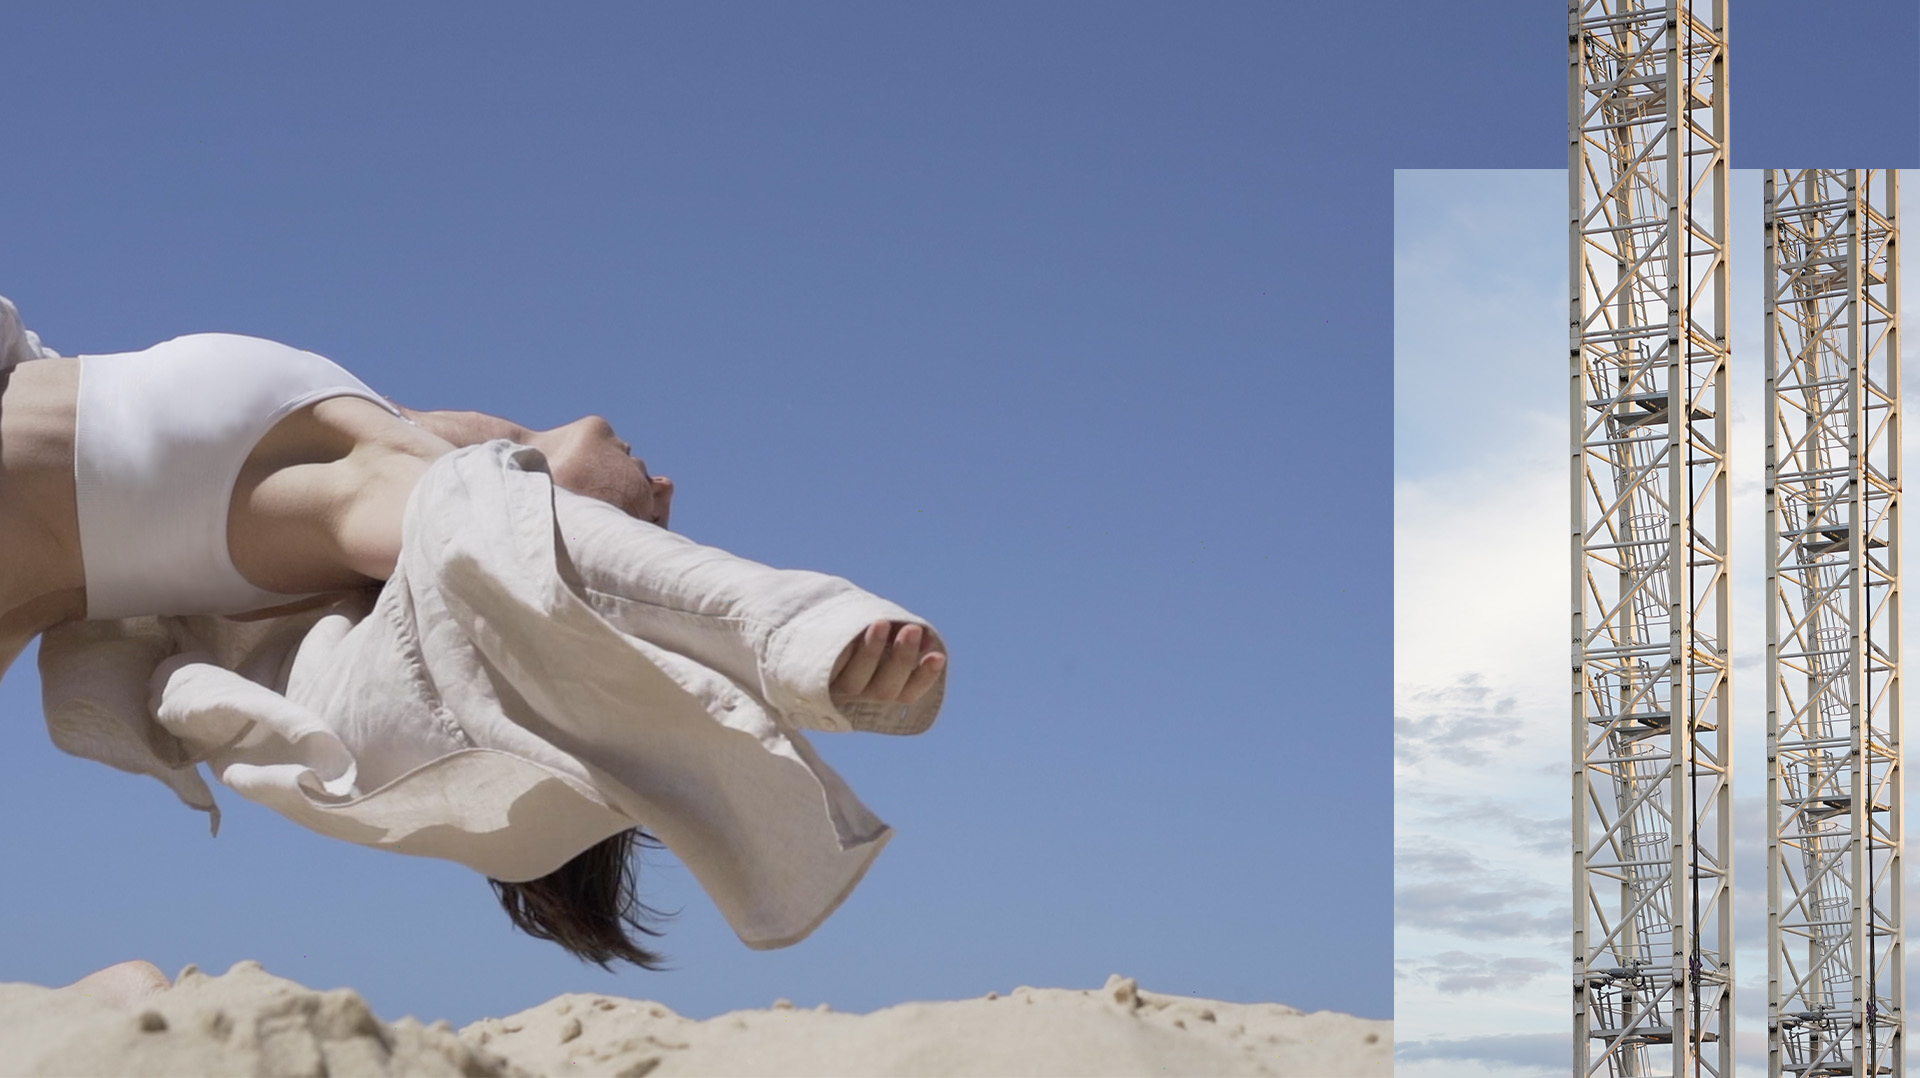 A still image taken from an artist film. It depicts a female, floating on her back just above the sand. There is an inset image of two tall metal towers.